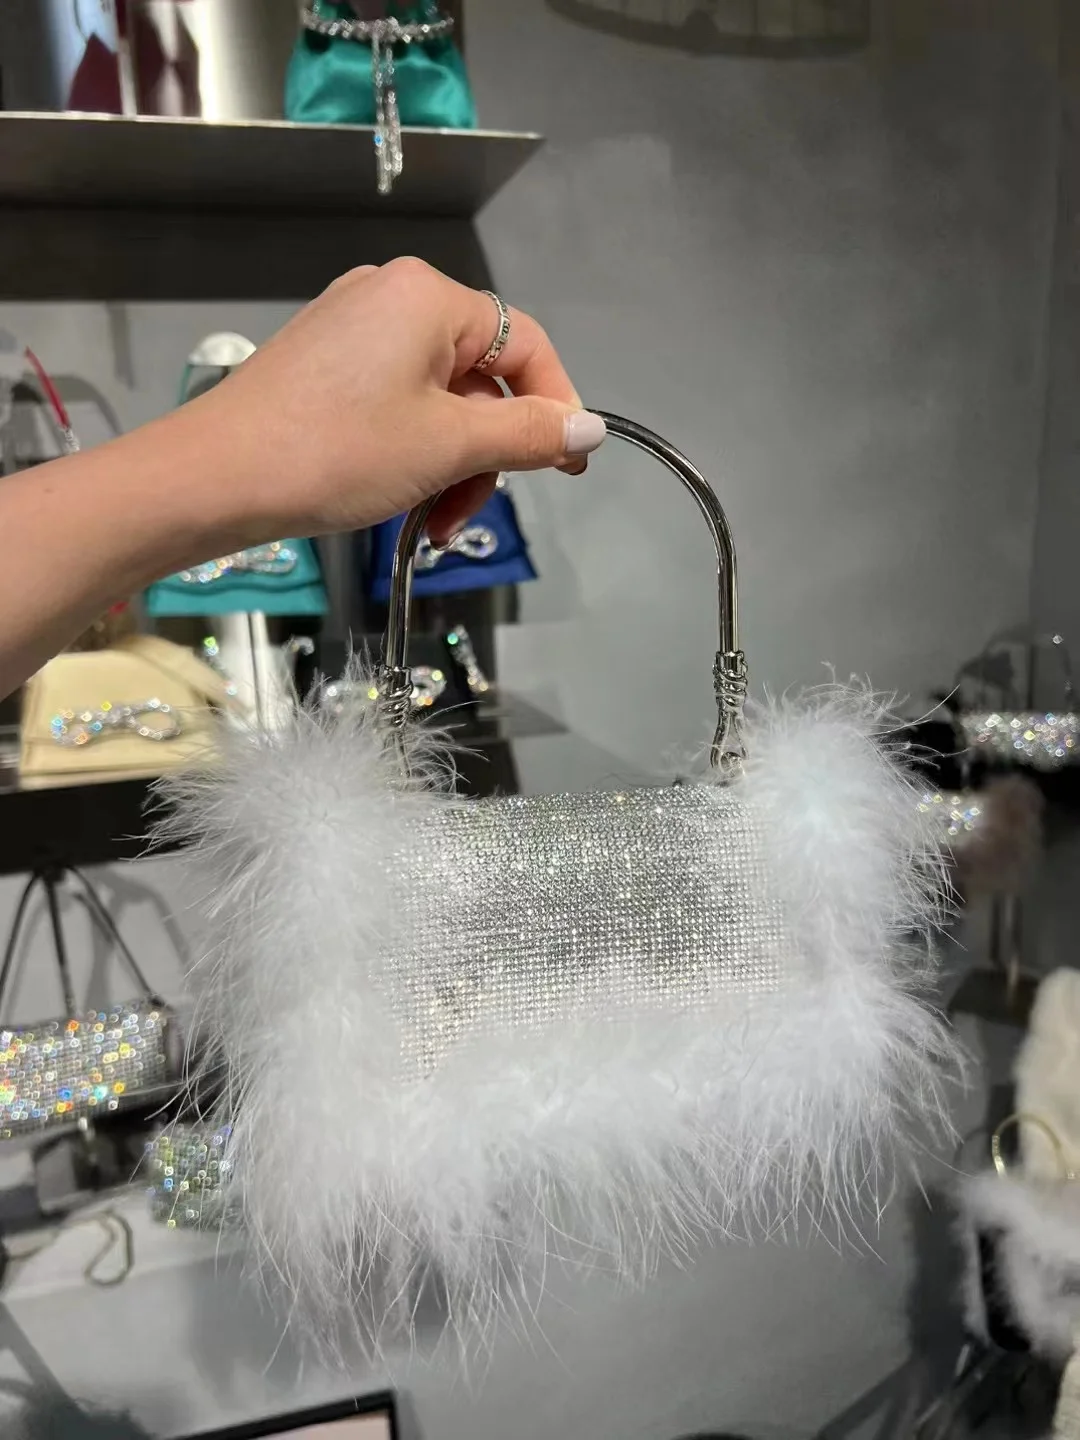 Luxury Designer Ostrich Feather Square Bag Crystal Shiny